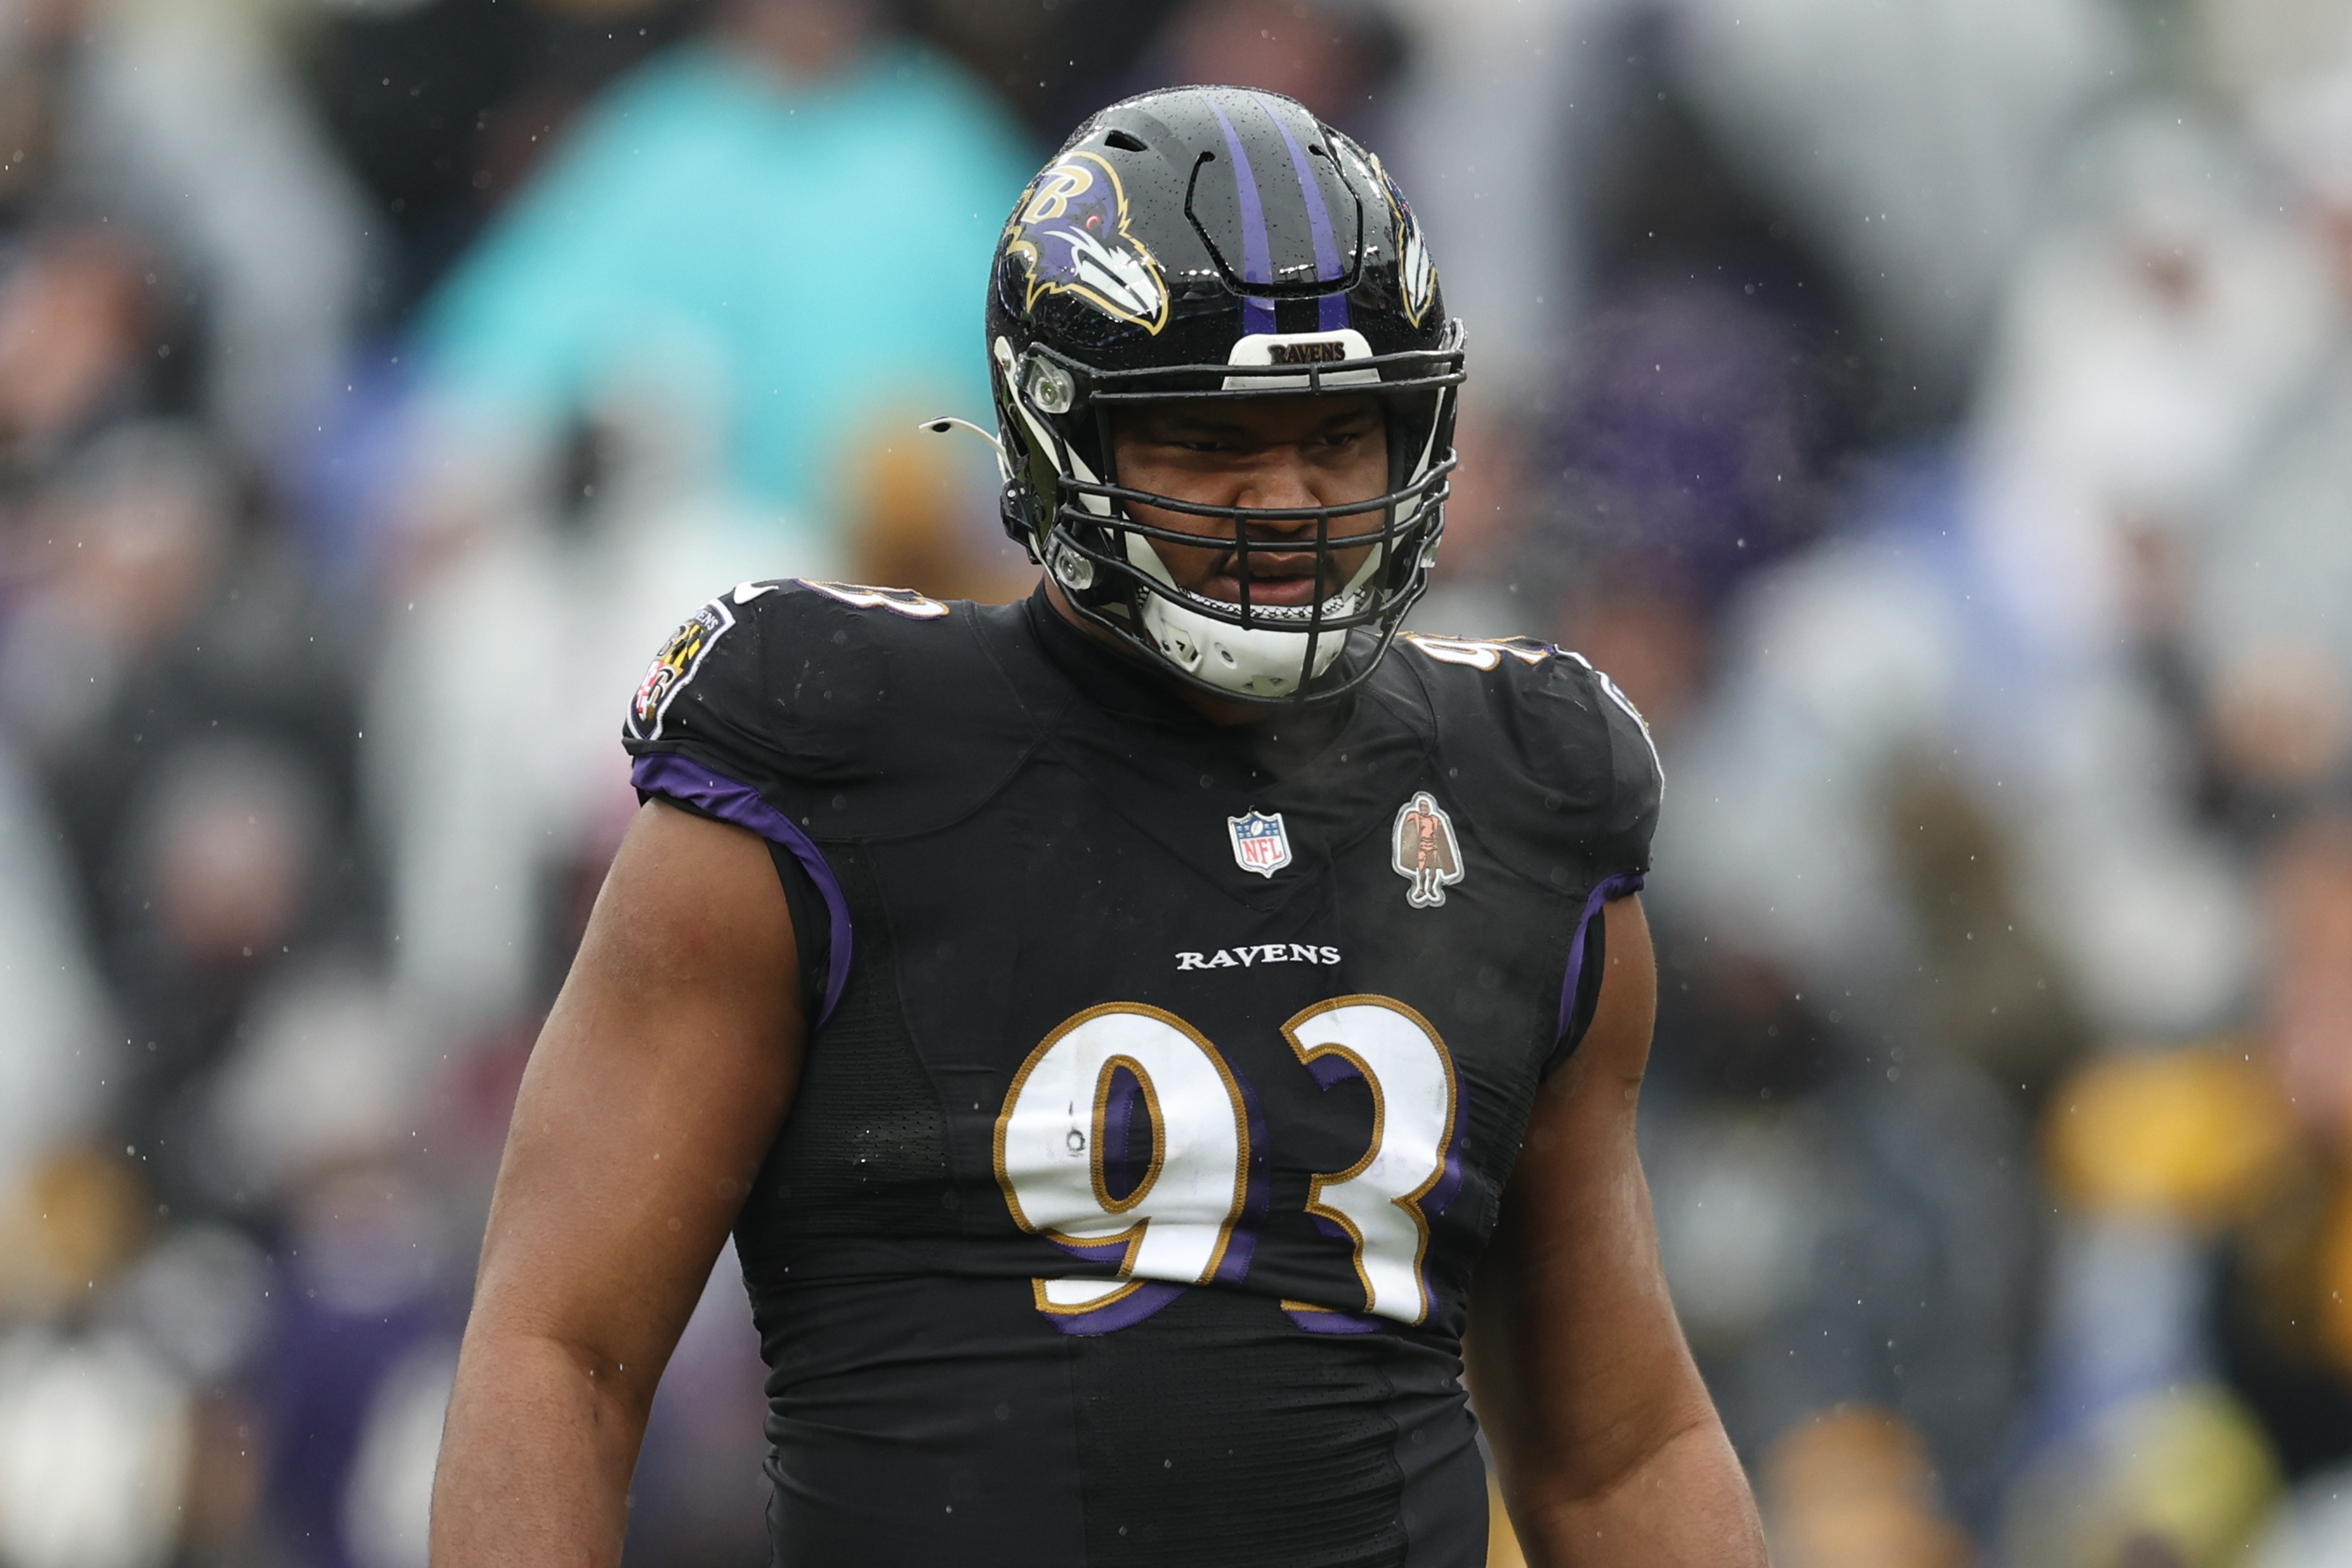 Ravens defensive end Calais Campbell will hit the market in NFL free agency